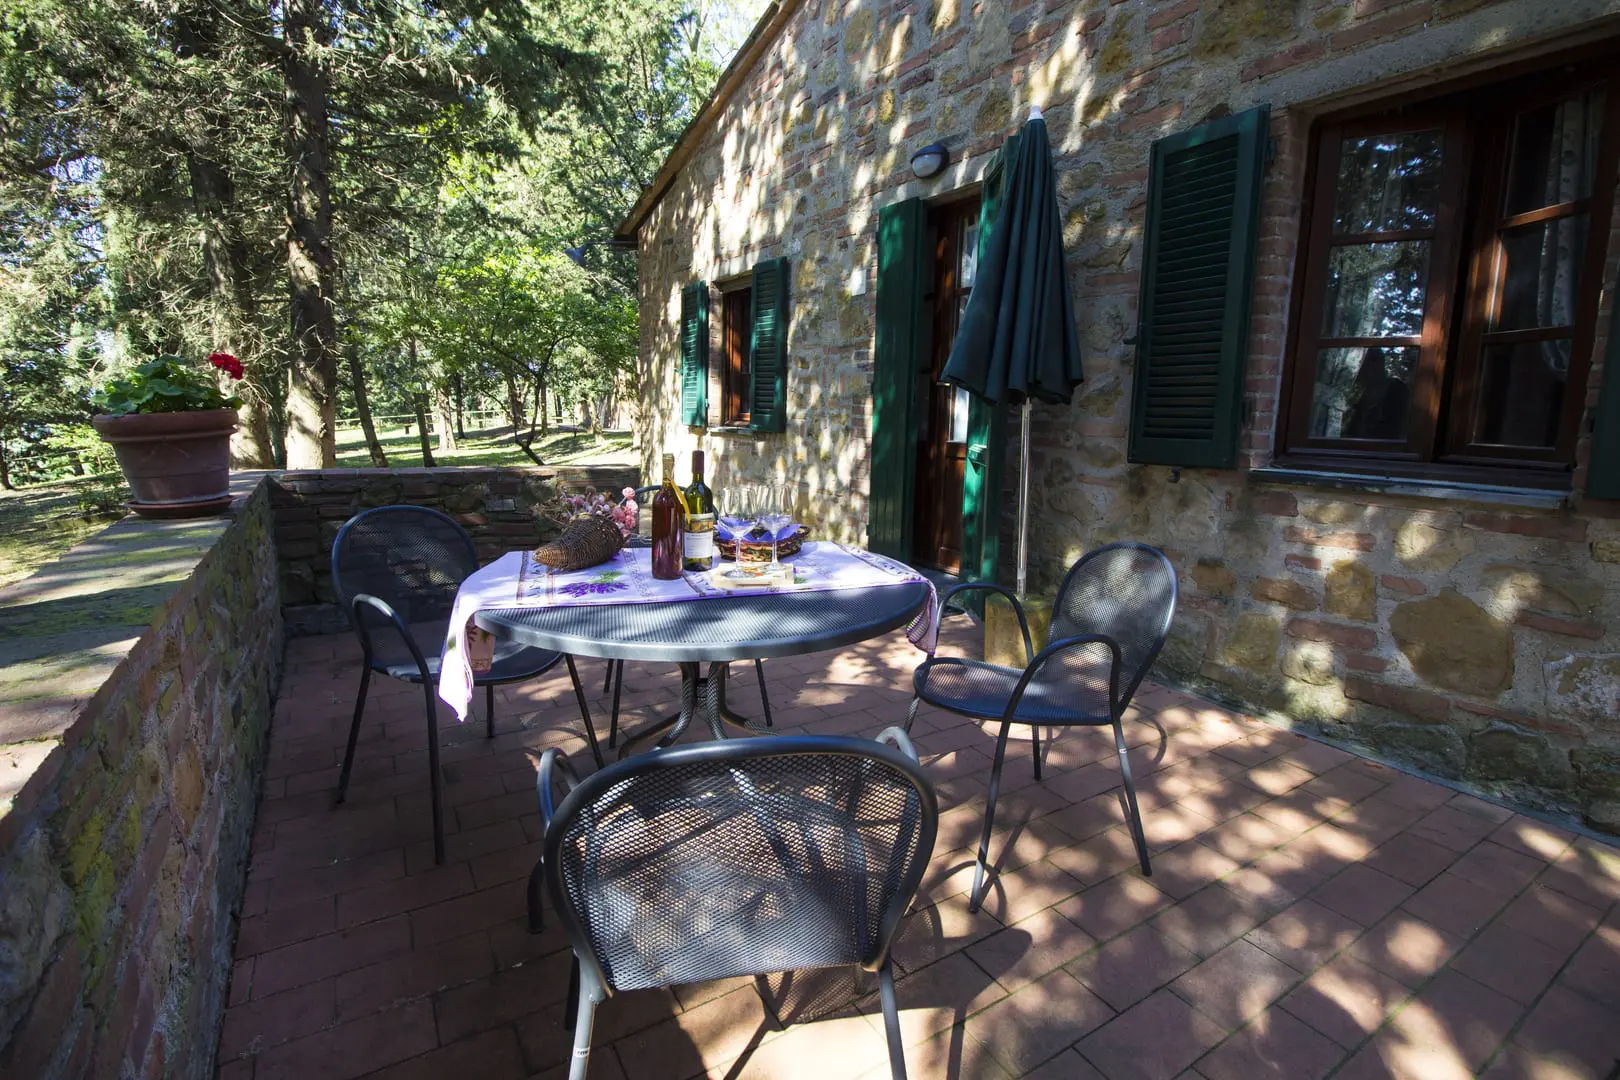 A table and chairs on the patio of an old stone house.